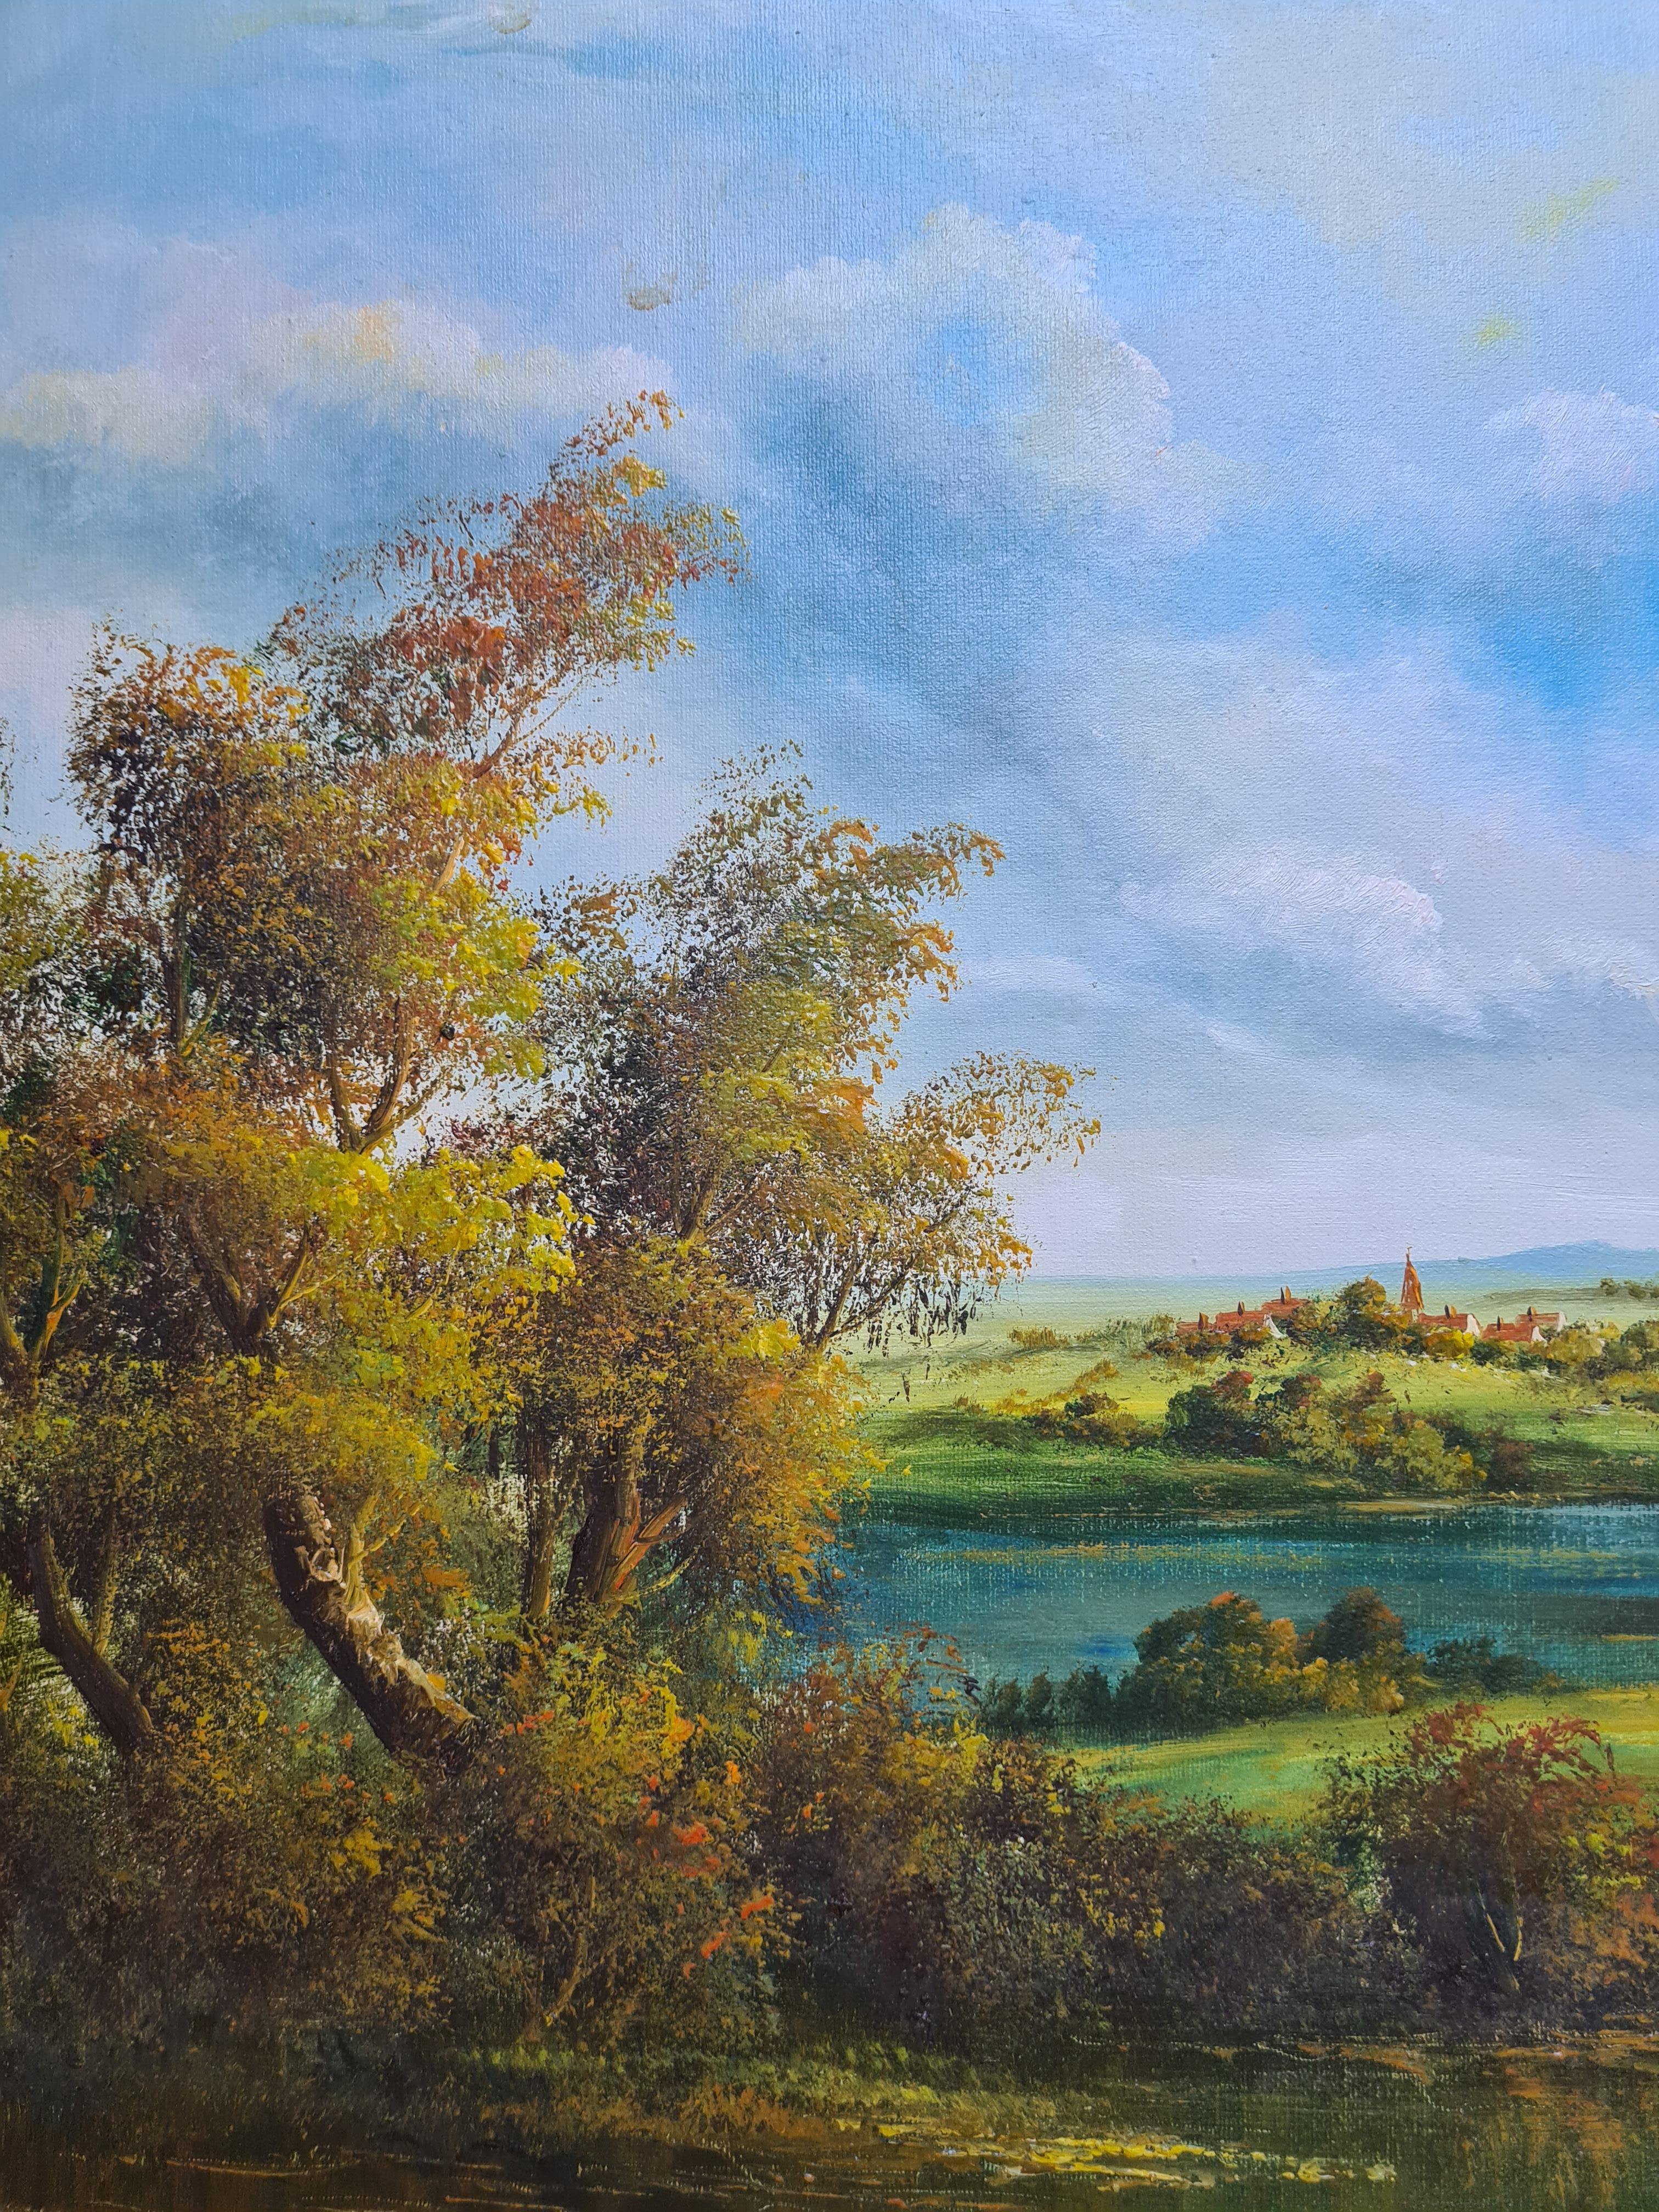 The Cottage, A Rural Idyll, Large Scale French Country Landscape. Oil on Canvas. - Brown Landscape Painting by Percy